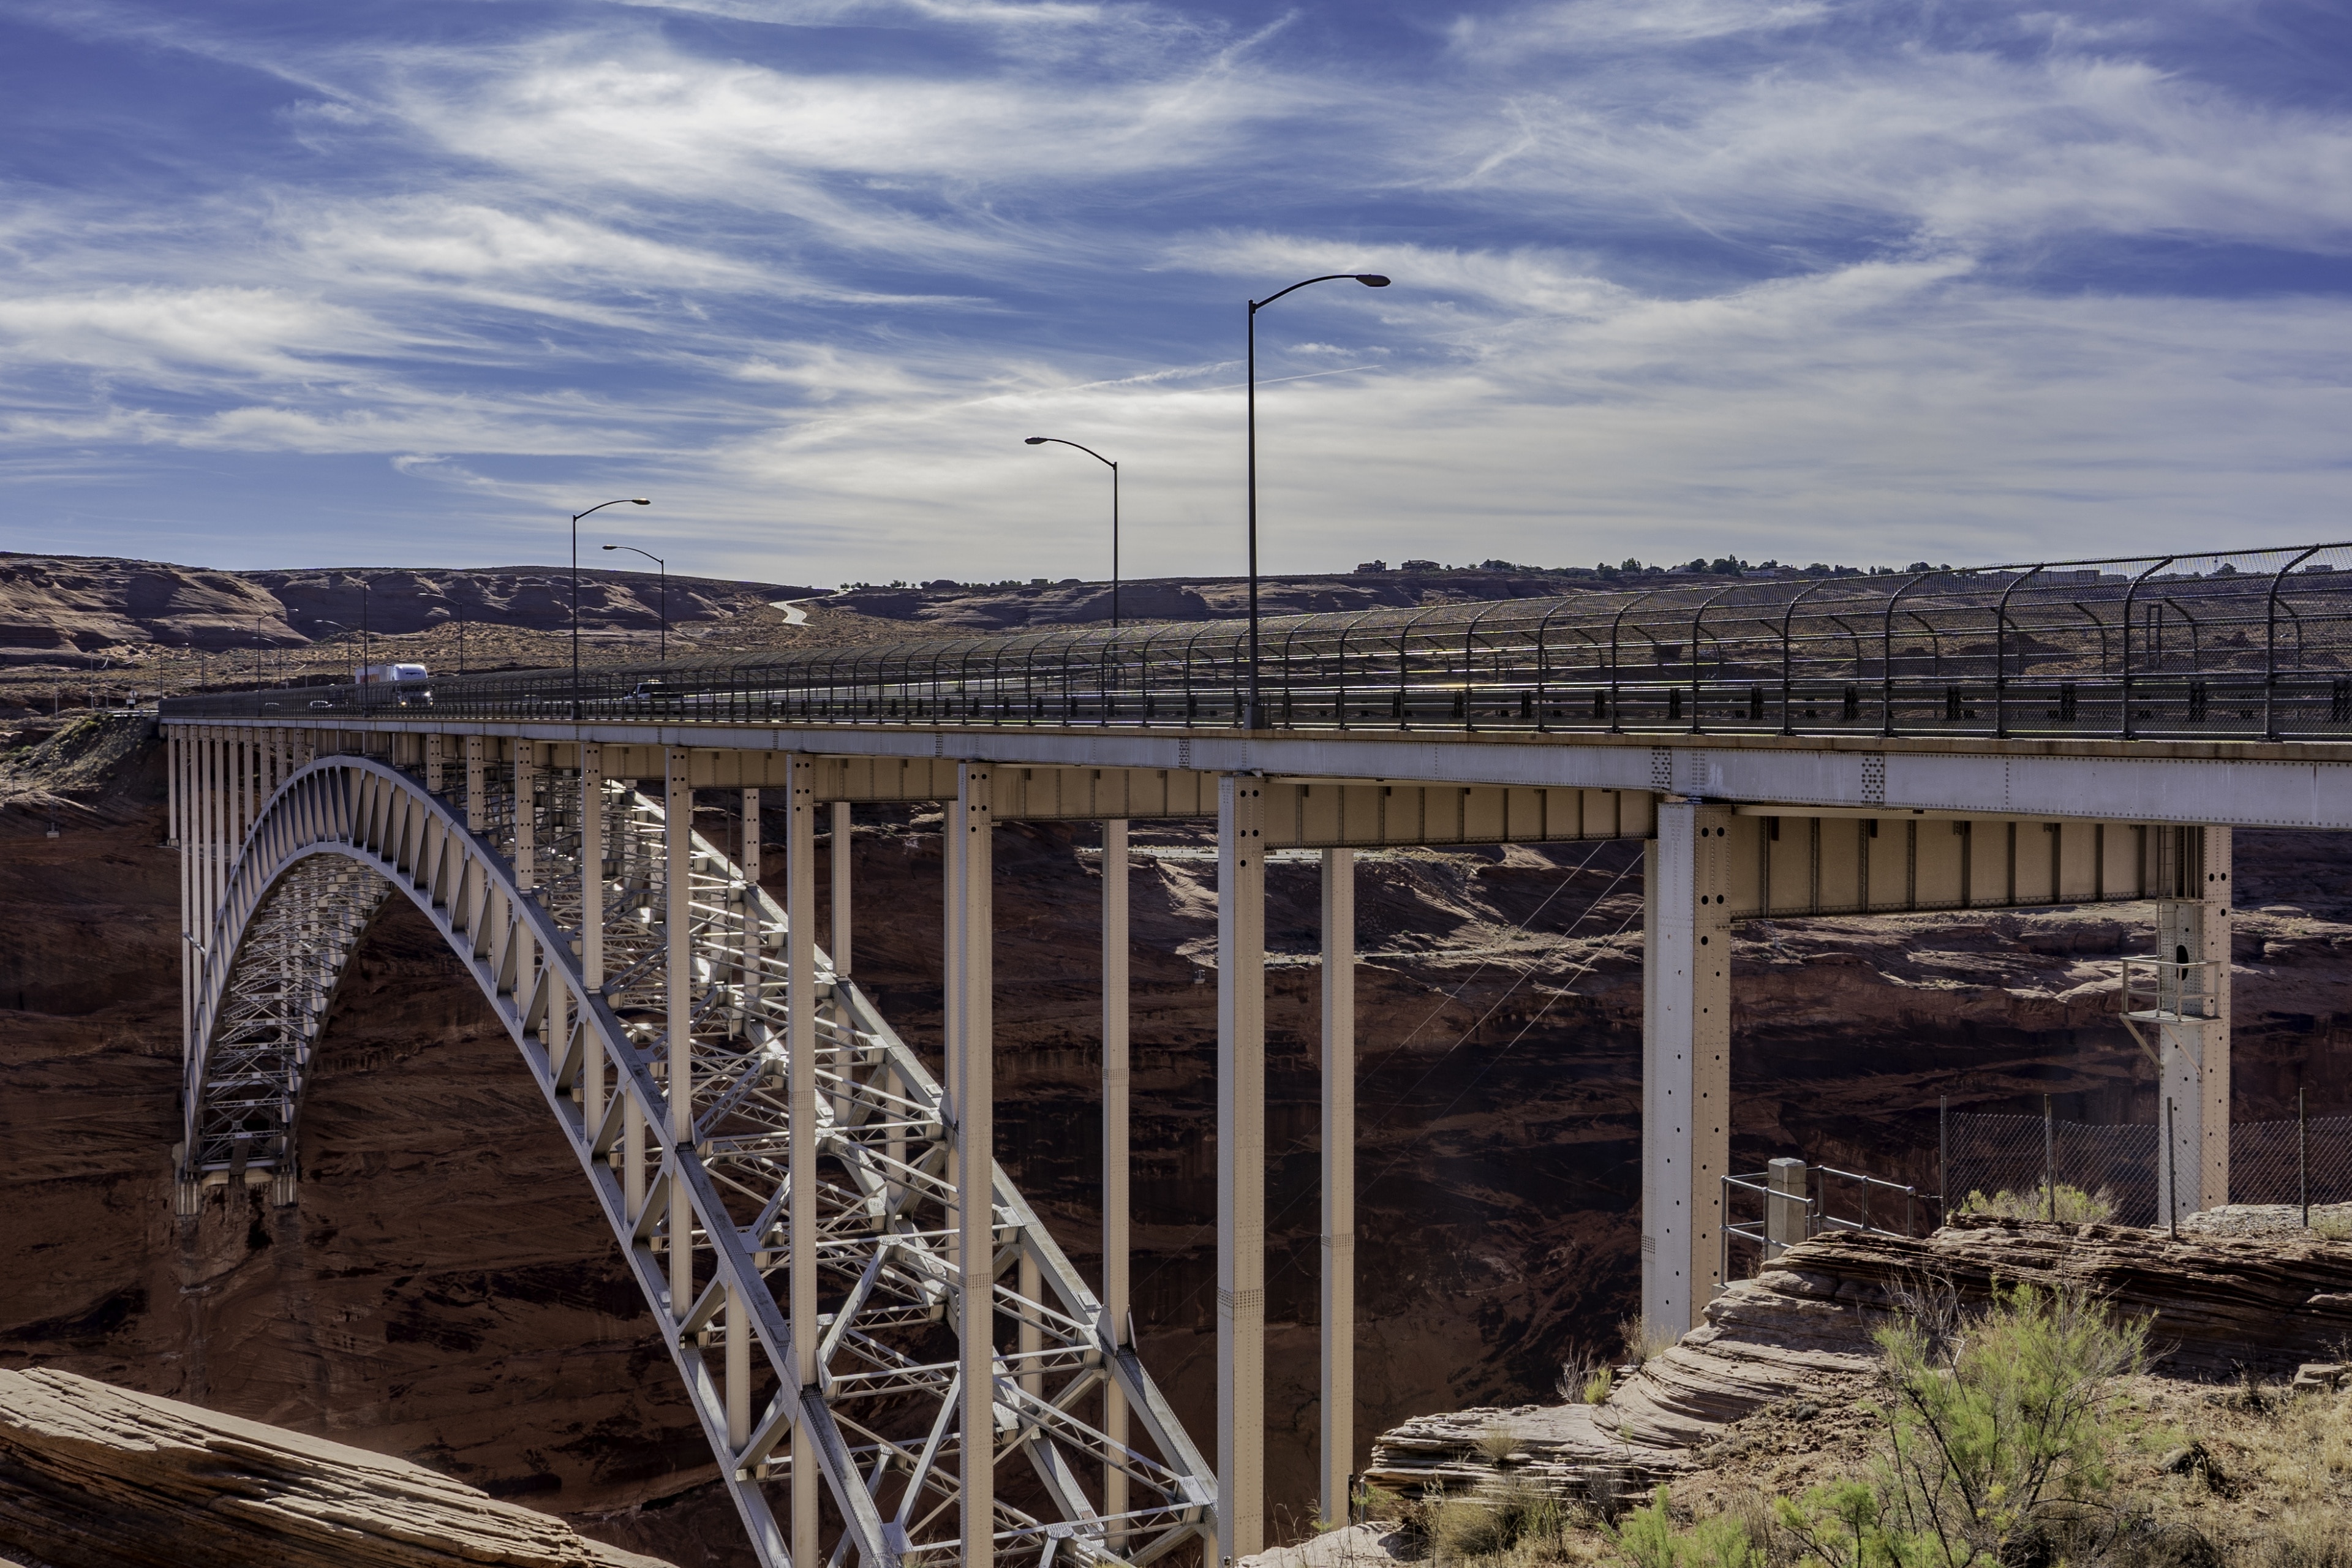 The Glen Canyon Dam Bridge connects Highway 89 to the city of Page, Arizona.  I love taking pictures of all kinds of bridges, especially arch bridges.  I definitely encourage anyone in Page not just to see the bridge, but see Lake Powell and the Glen Canyon Dam as well.